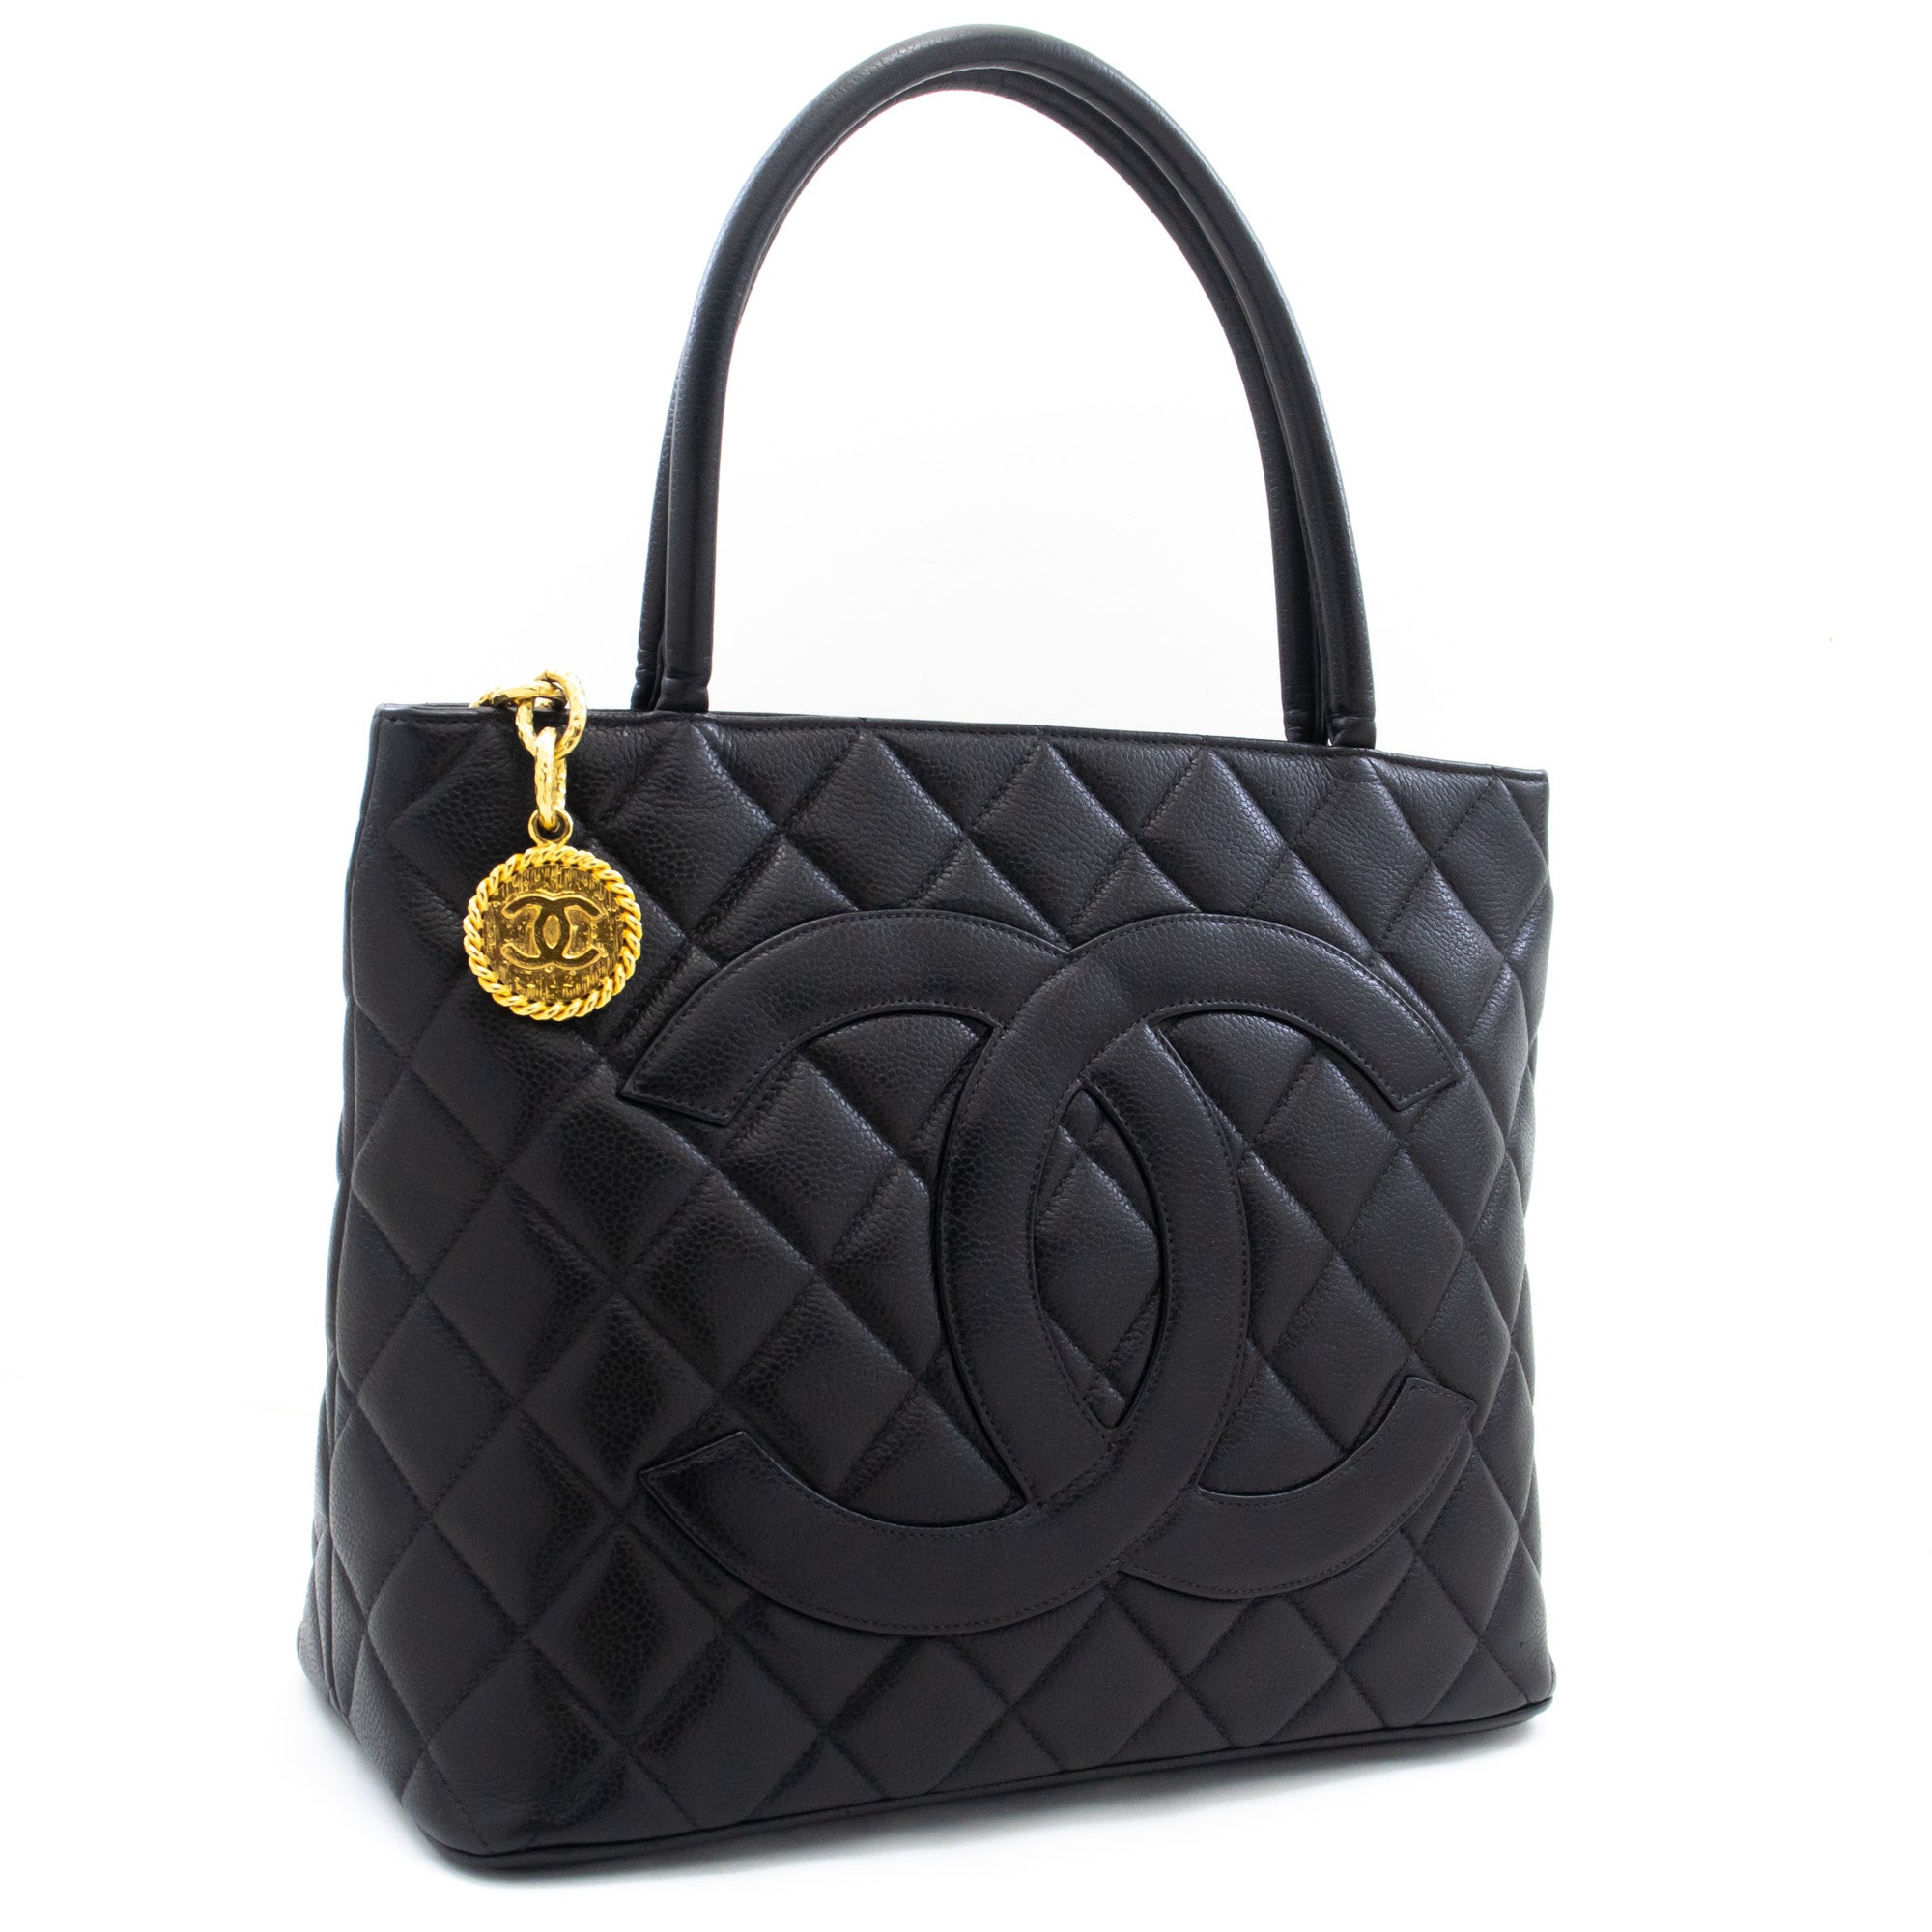 CHANEL GRAND SHOPPING BLACK TOTE IN CAVIAR LEATHER IN GOLD HARDWARE